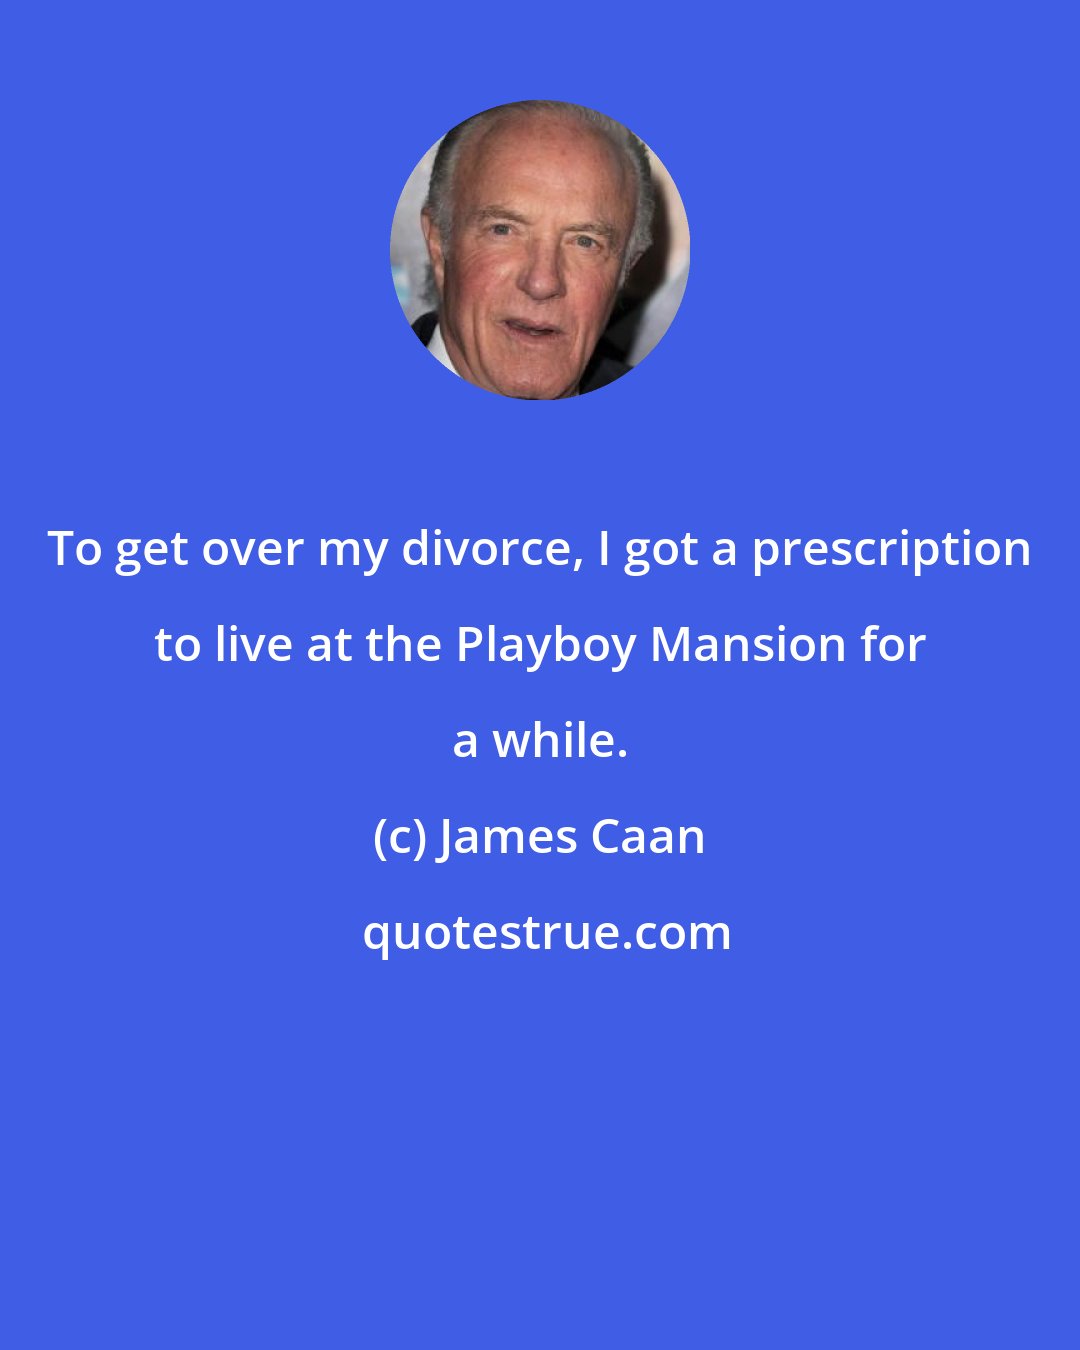 James Caan: To get over my divorce, I got a prescription to live at the Playboy Mansion for a while.